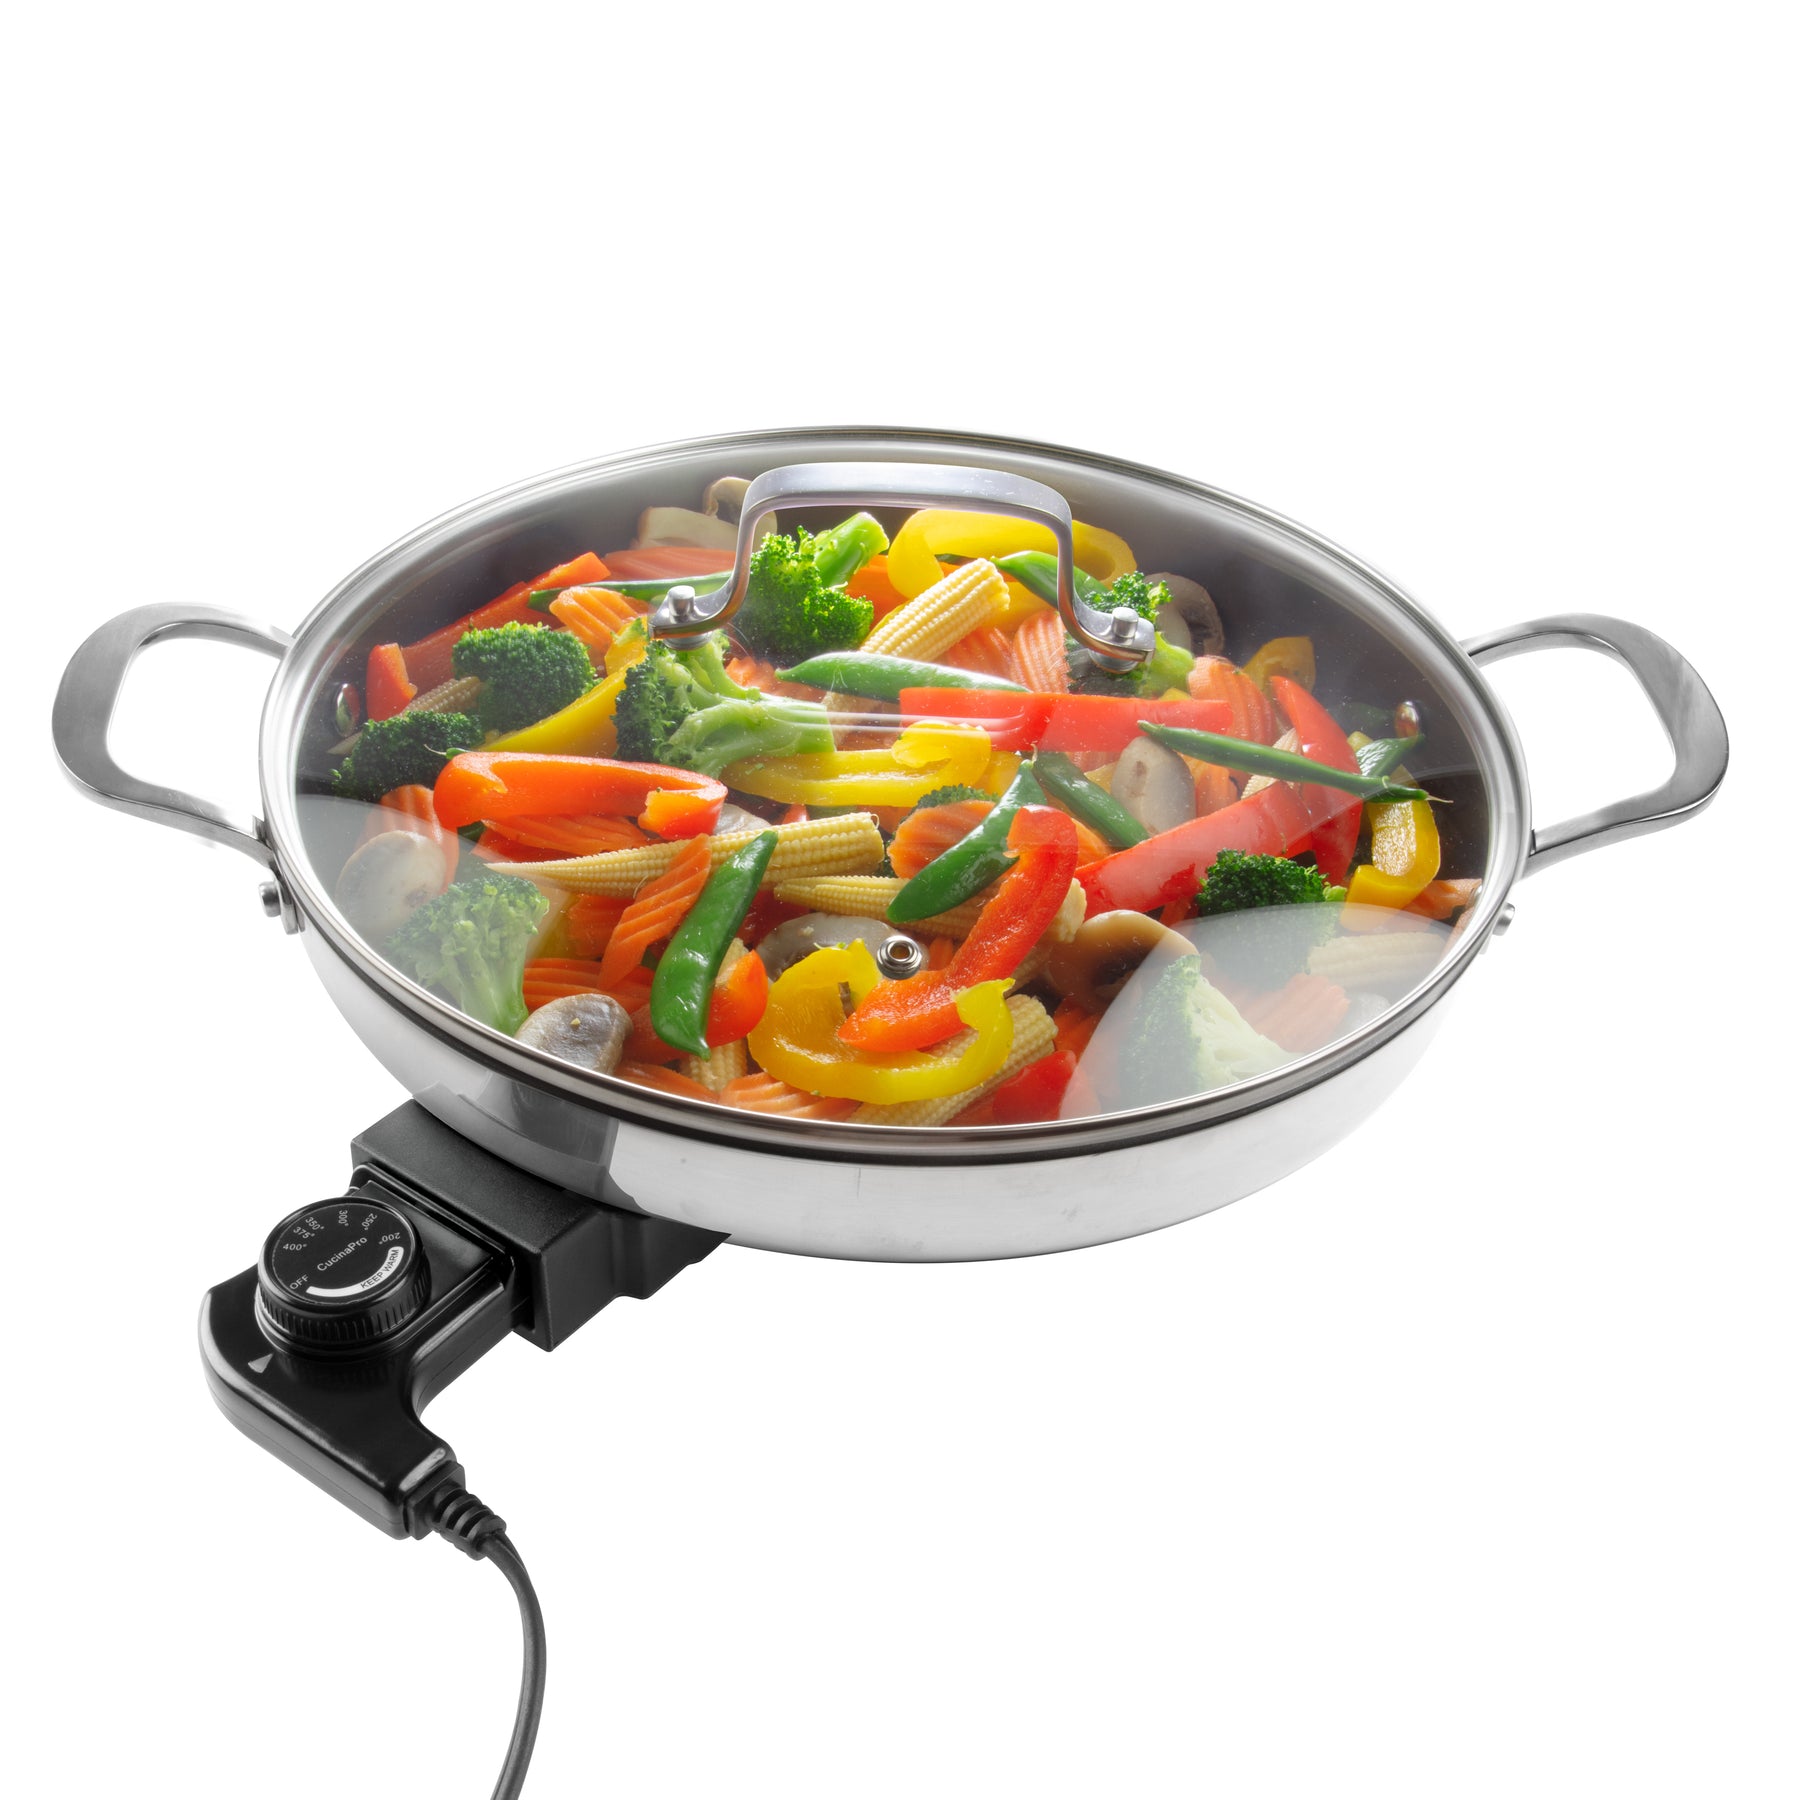  Electric Skillet By Cucina Pro - 18/10 Stainless Steel, Frying  Pan with Non Stick Interior, with Glass Lid, 12 Round, Temperature Control  Probe for Adjustable Heat Settings: Home & Kitchen